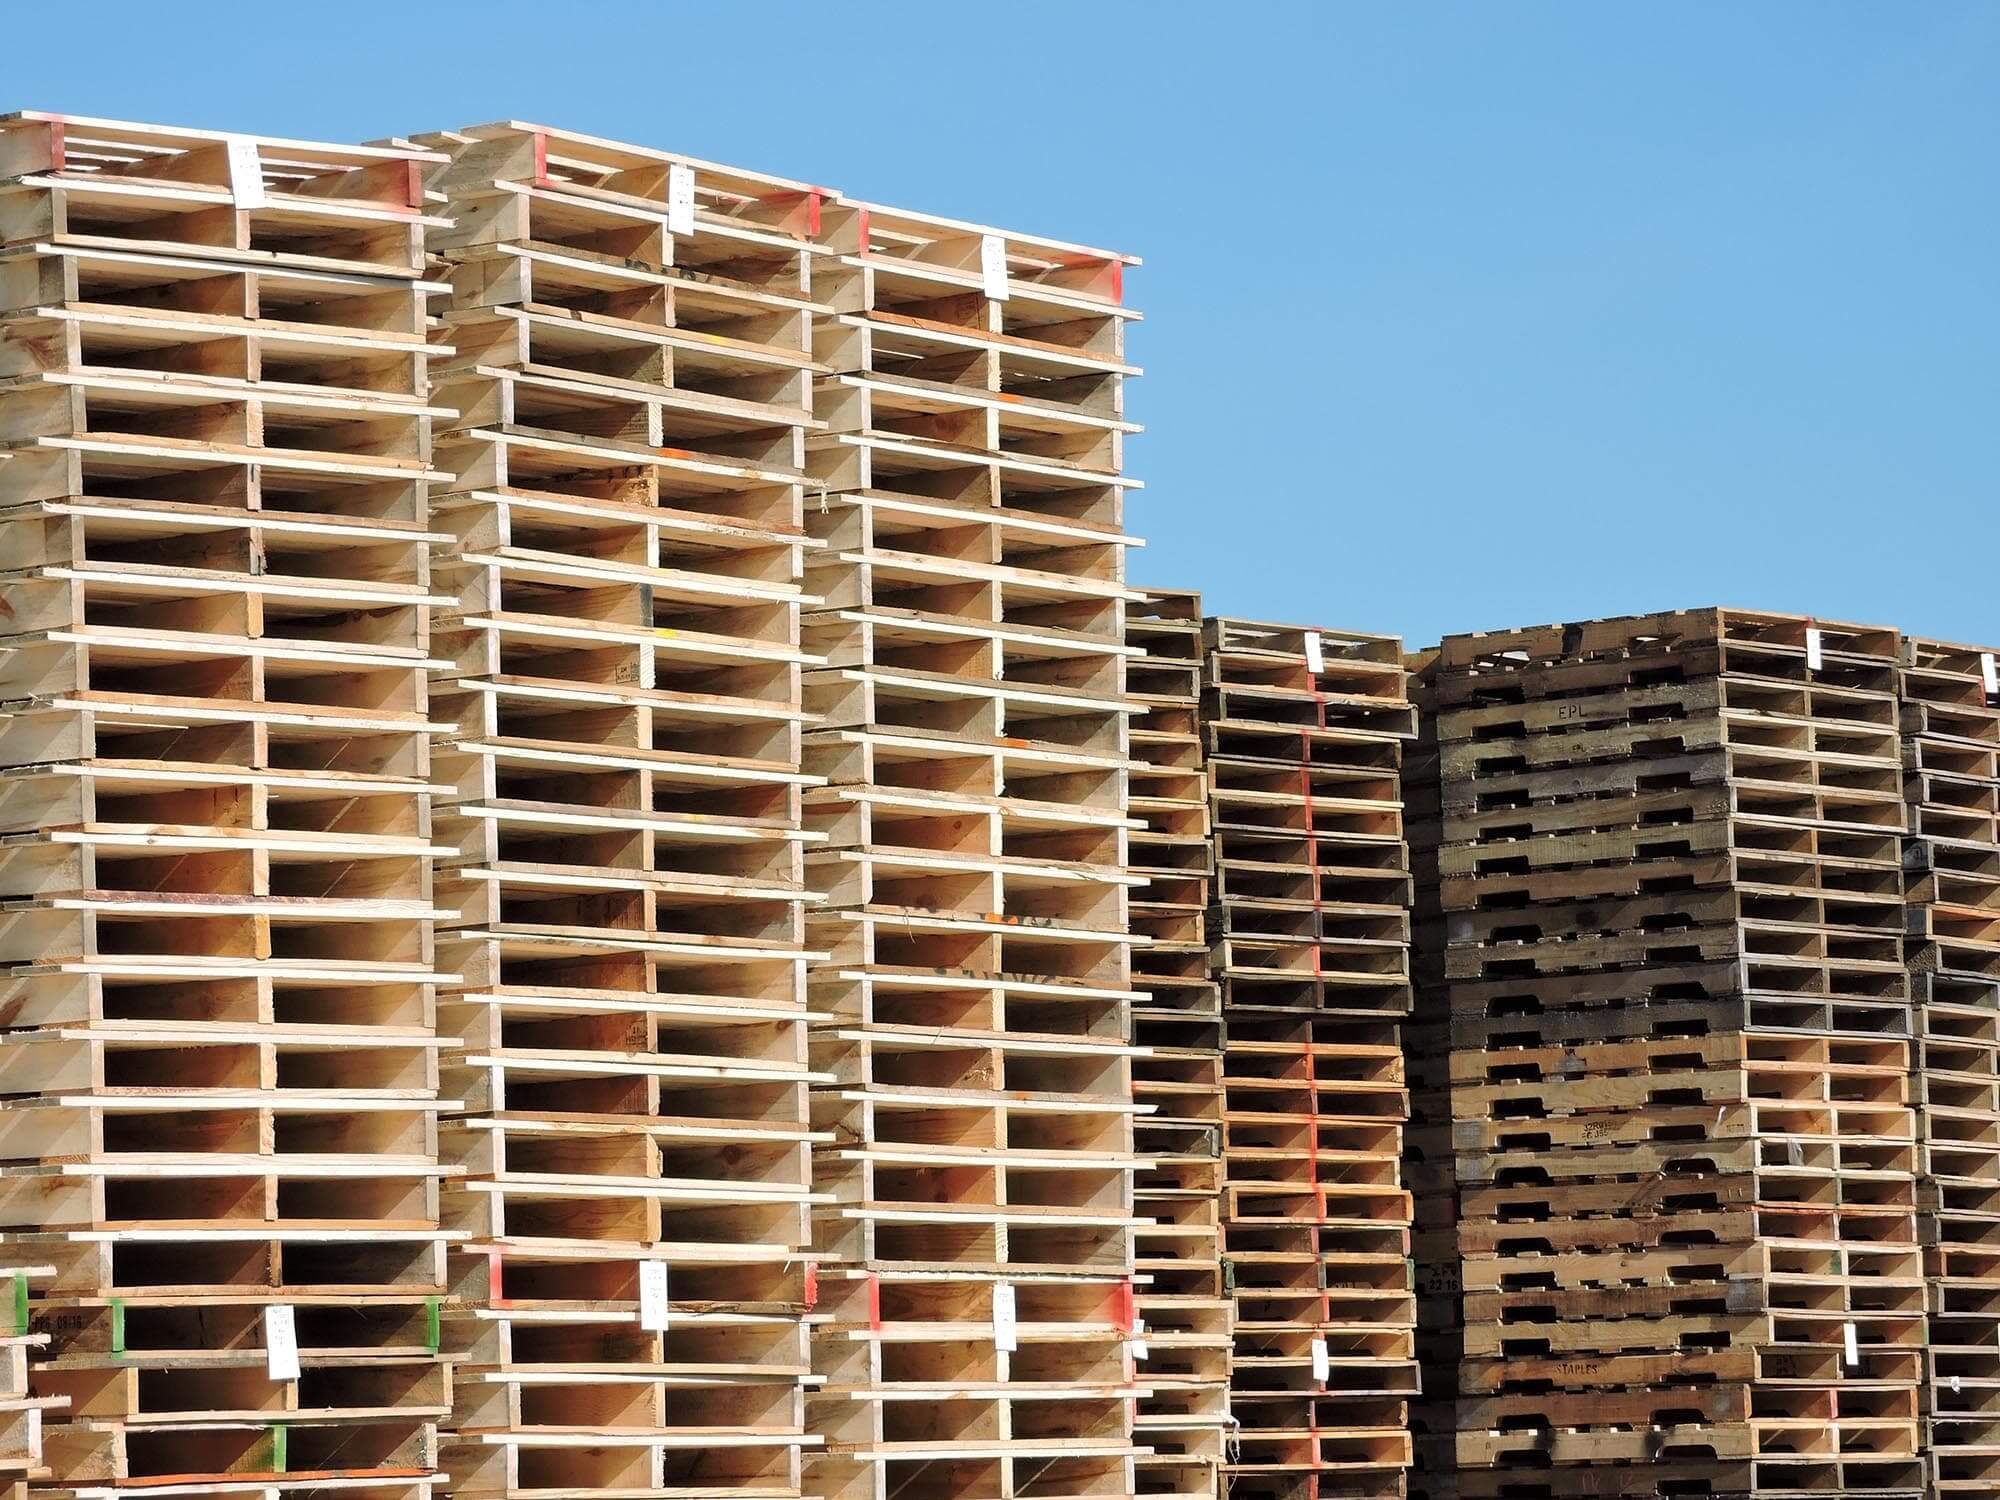 48x40 Wooden Pallets stacked